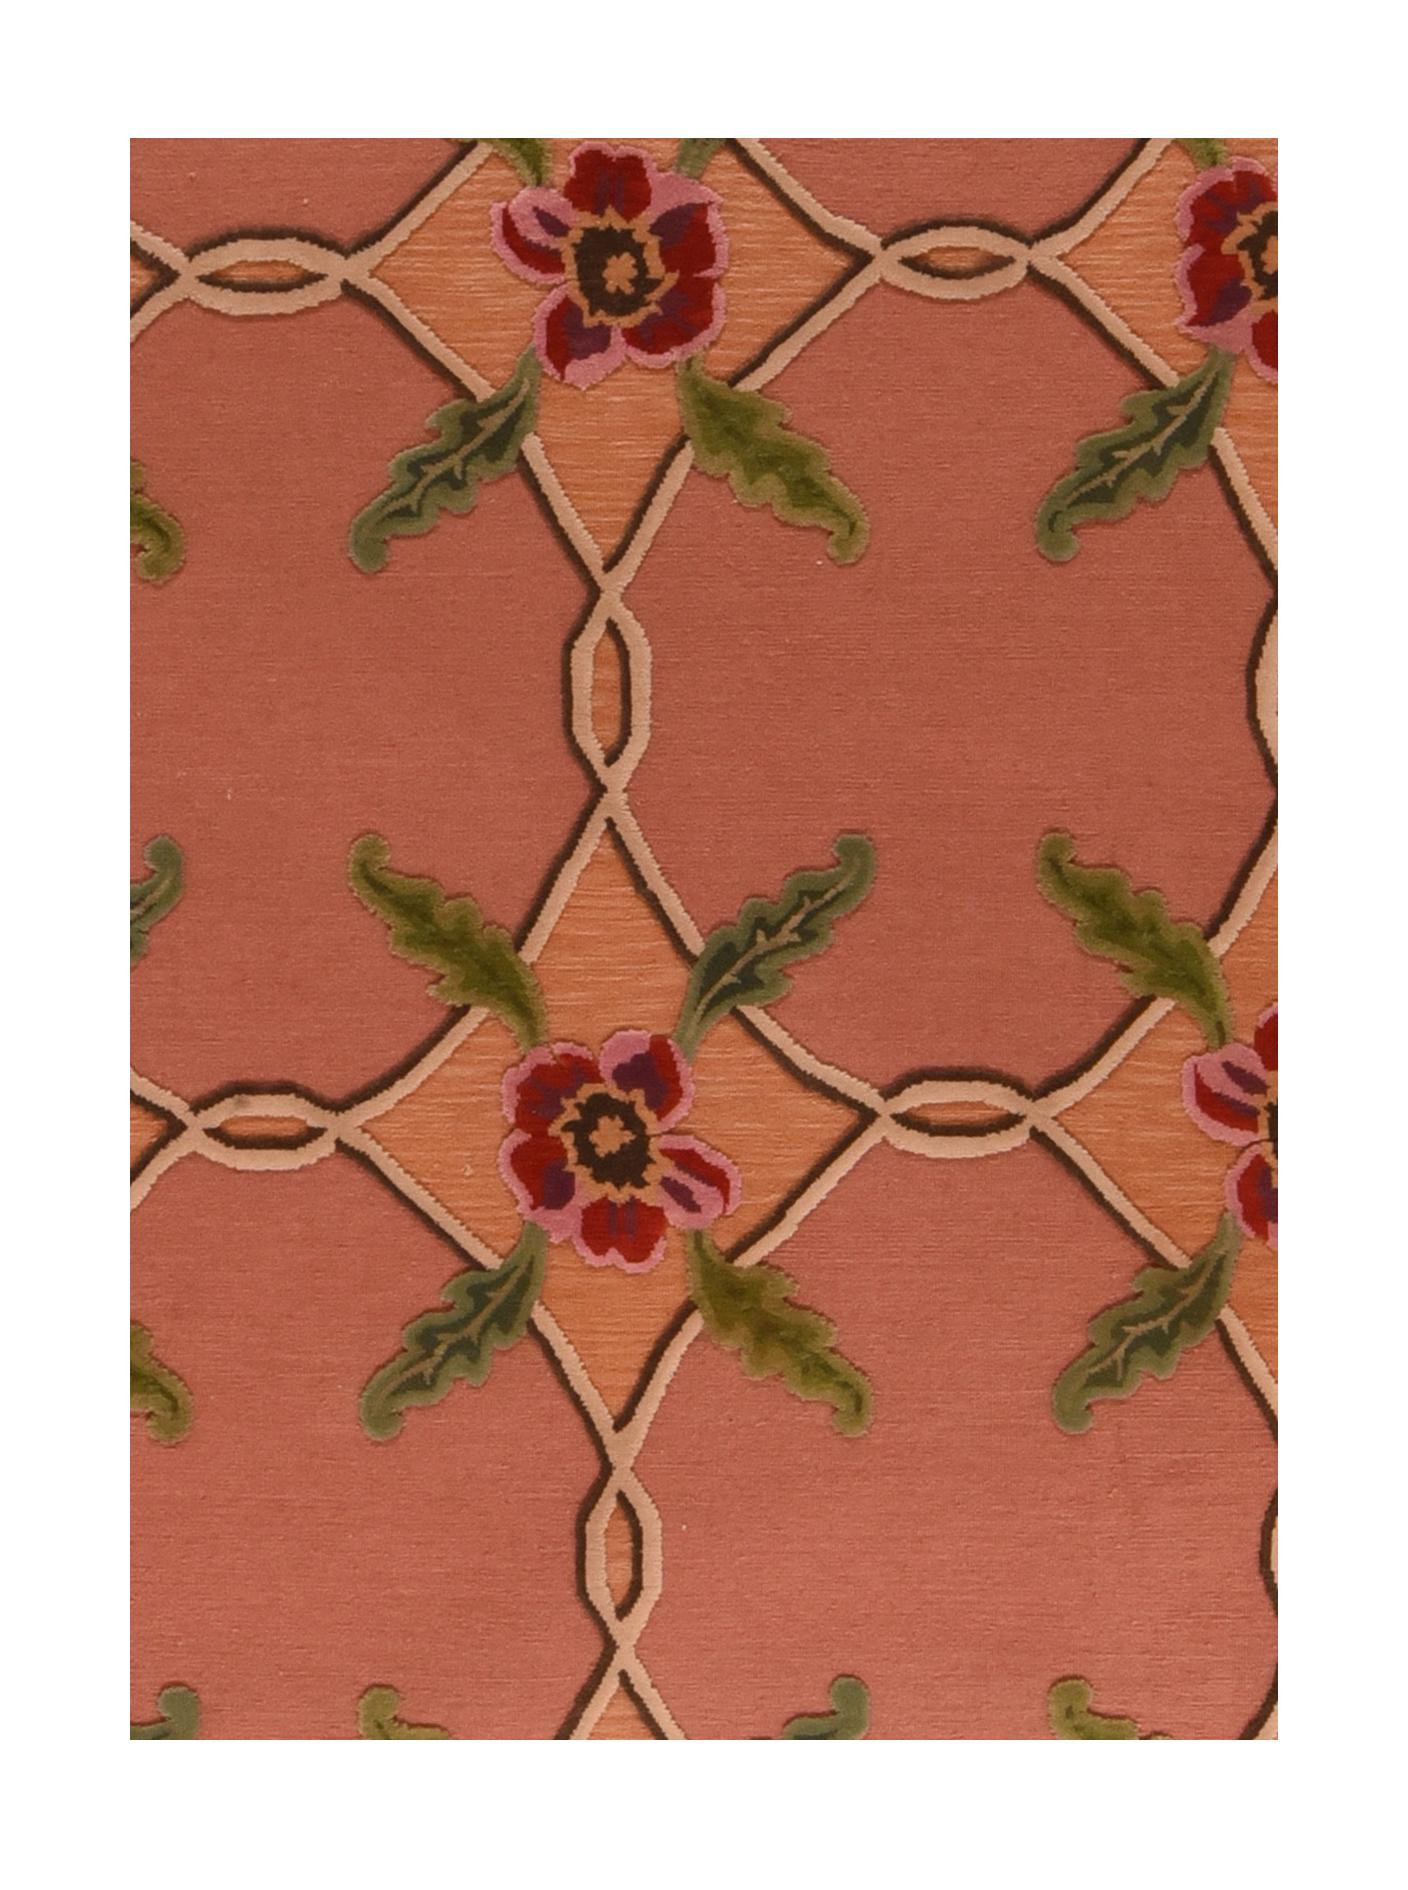 Sumak (also spelled Soumakh, Sumak, Sumac, or Soumac) is a tapestry technique of weaving strong and decorative textiles used as rugs and domestic bags. Baks used for bedding are known as Soumak Mafrash. Soumak is a type of flat weave, somewhat